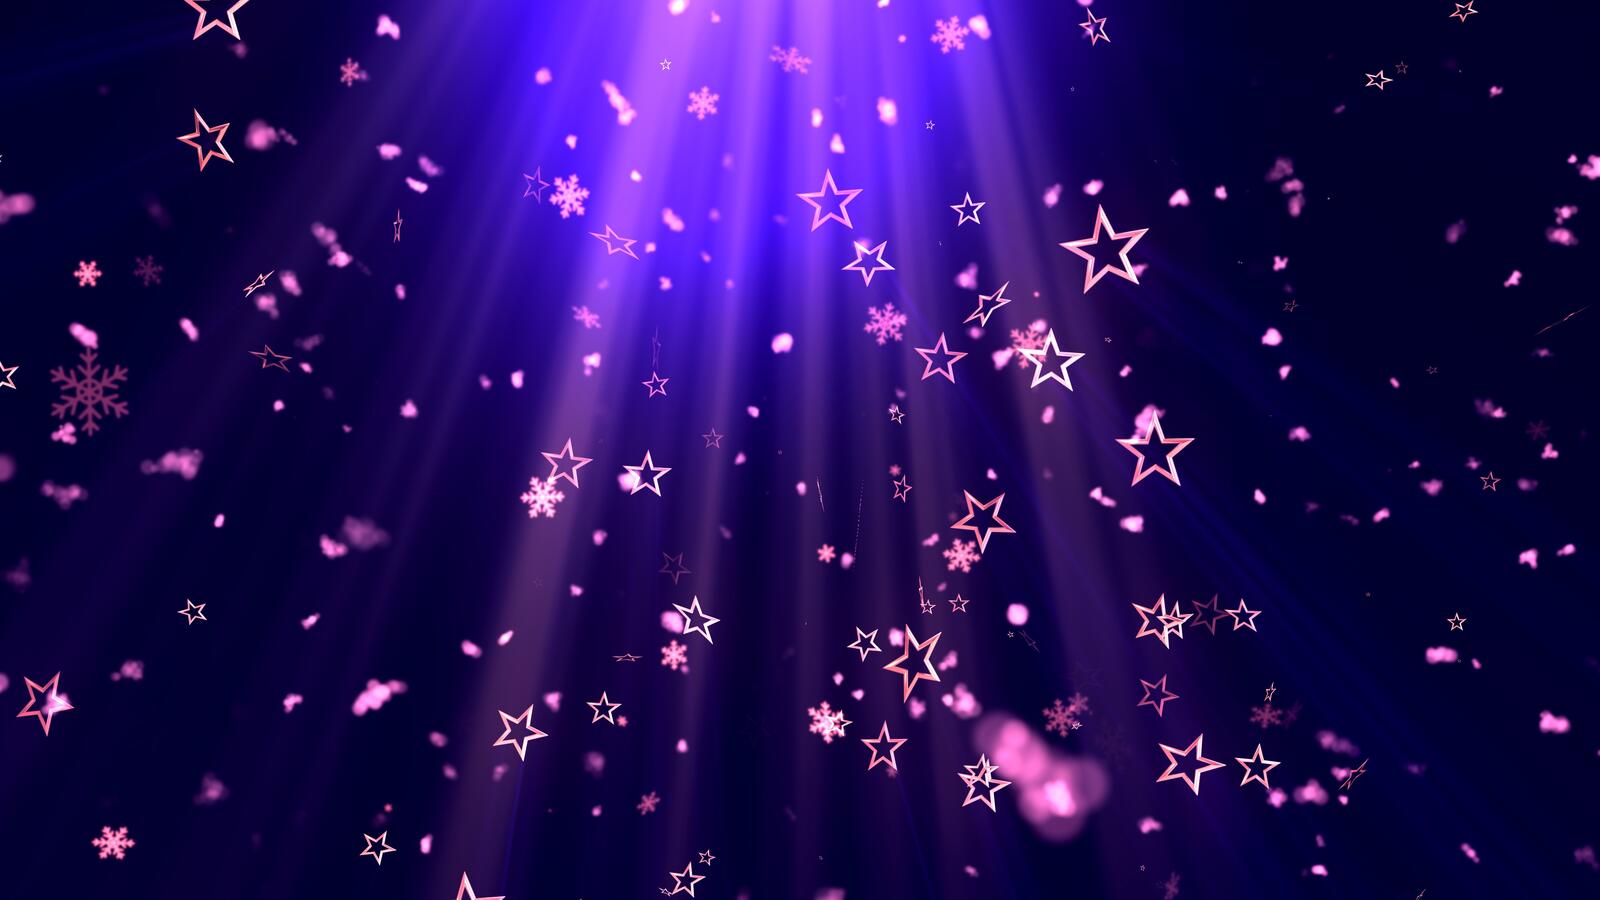 Wallpapers shooting stars snowflakes blue background on the desktop